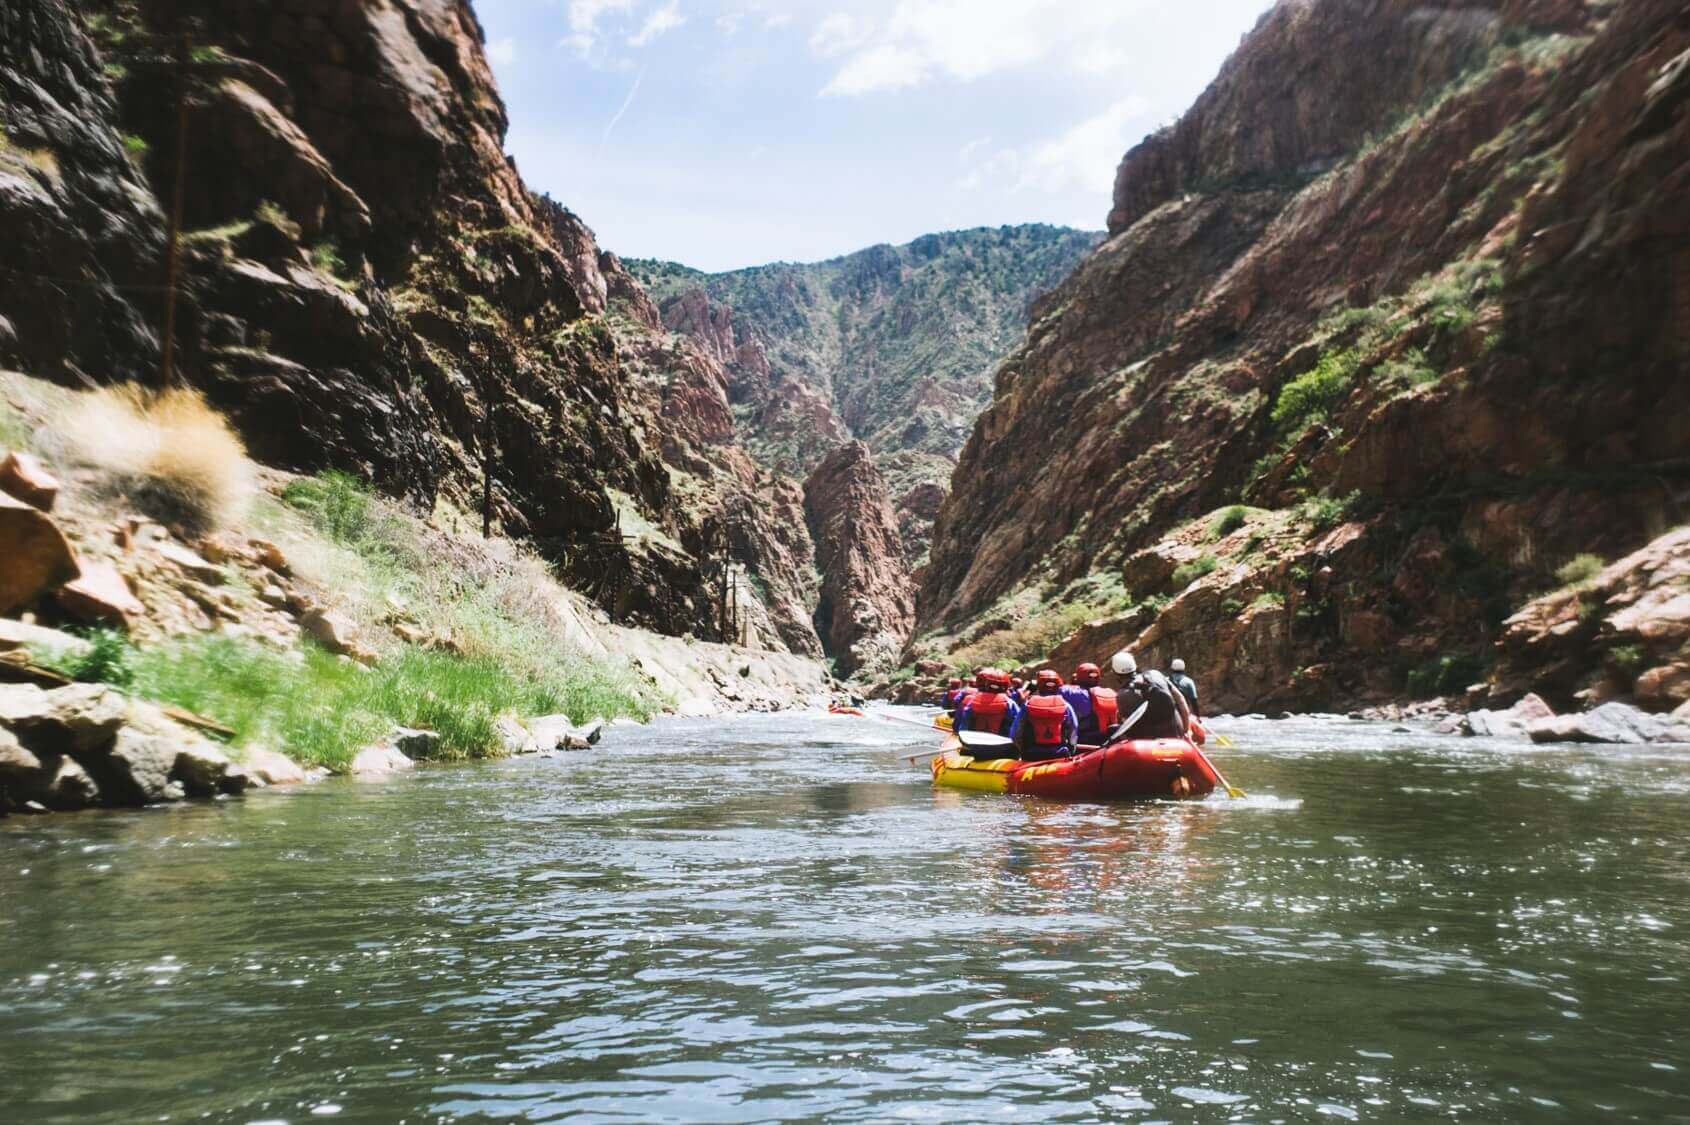 Rafting in Colorado – What to Look For In a Colorado Rafting Guide